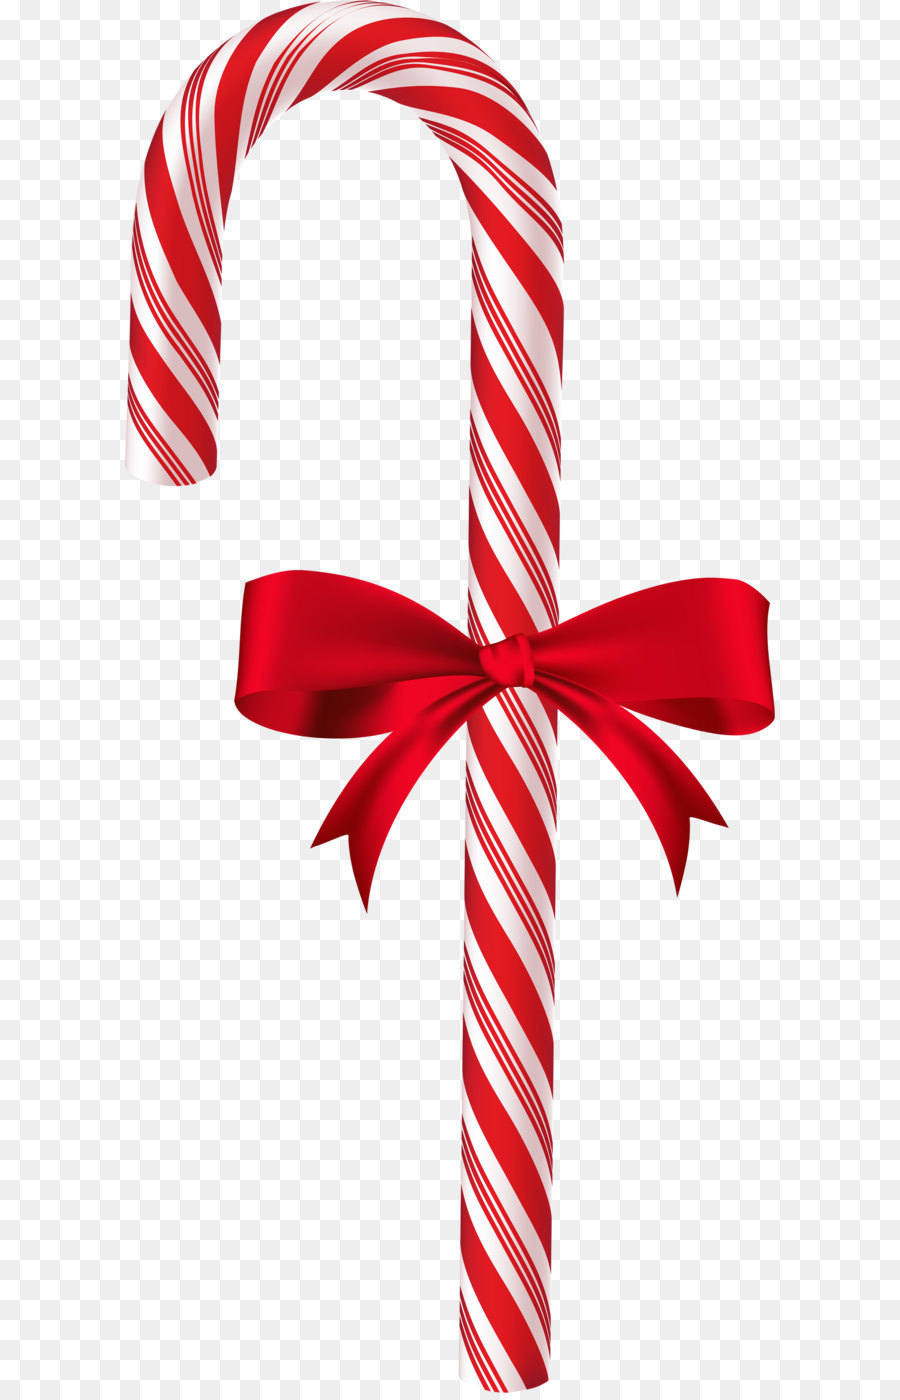 Candy cane Christmas Clip art - HD Christmas candy png download - 1636*3505 - Free Transparent Candy Cane png Download.